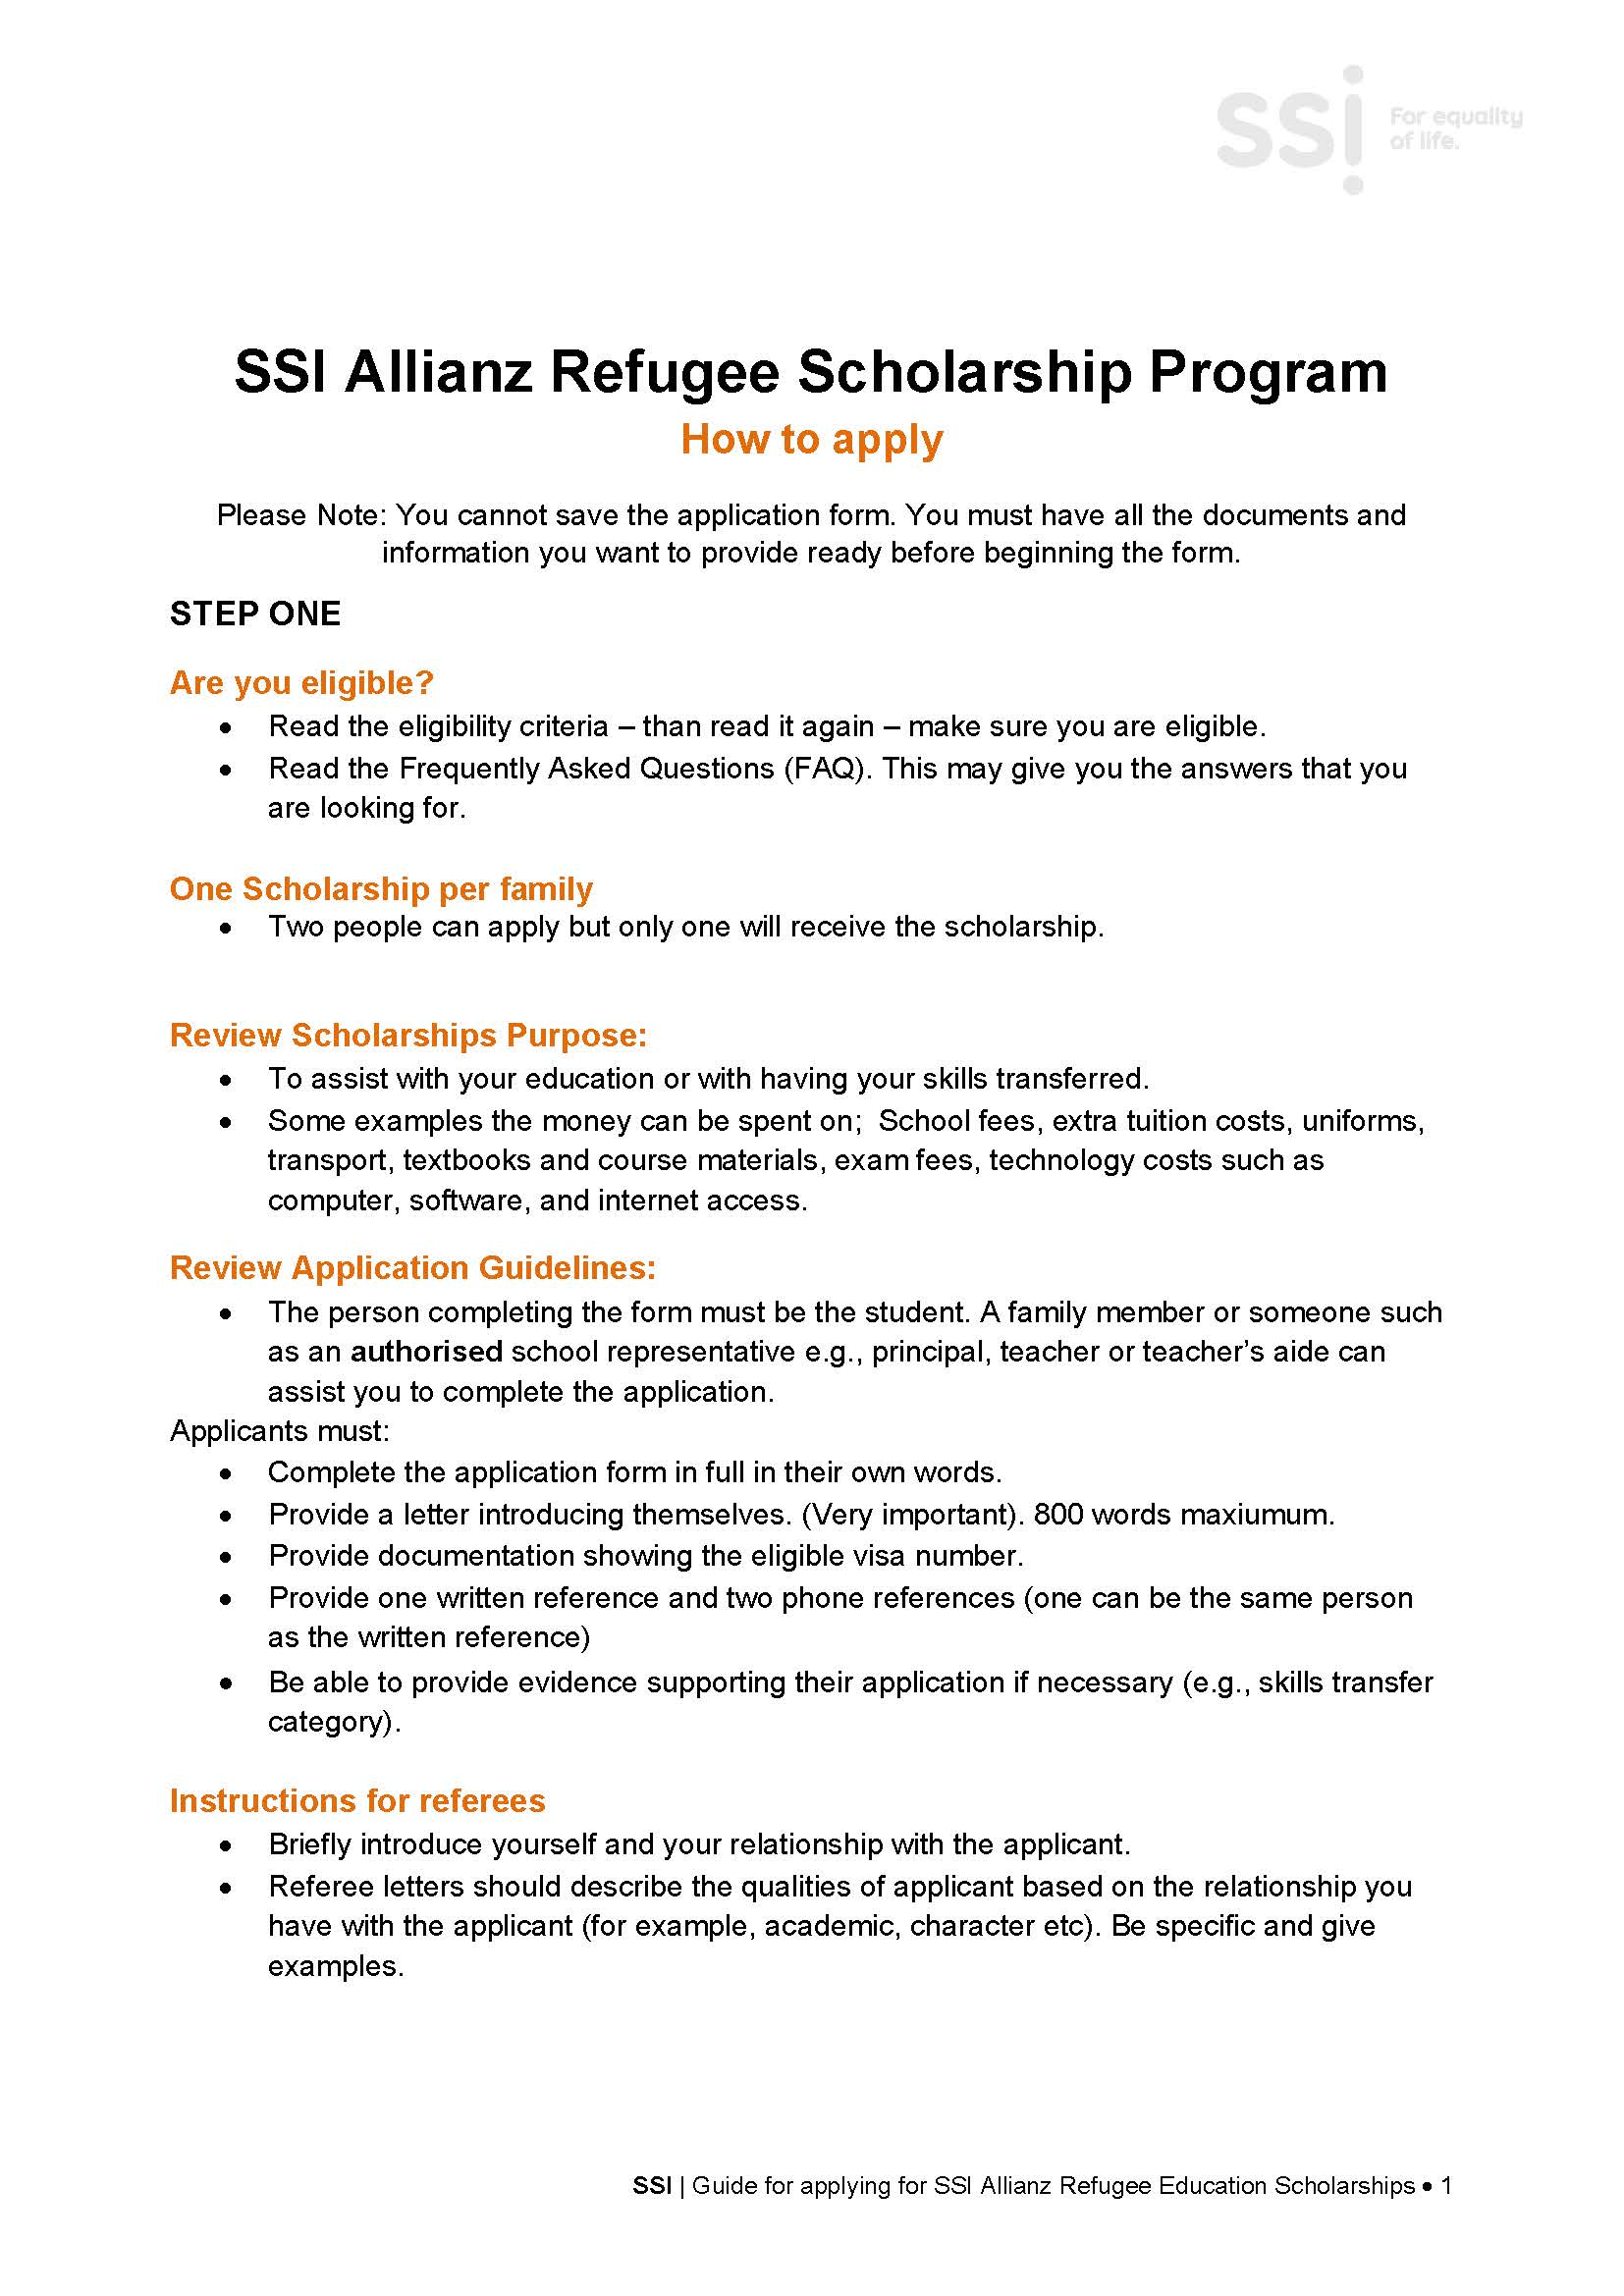 Guide for applying for SSI Allianz Refugee Education Scholarships